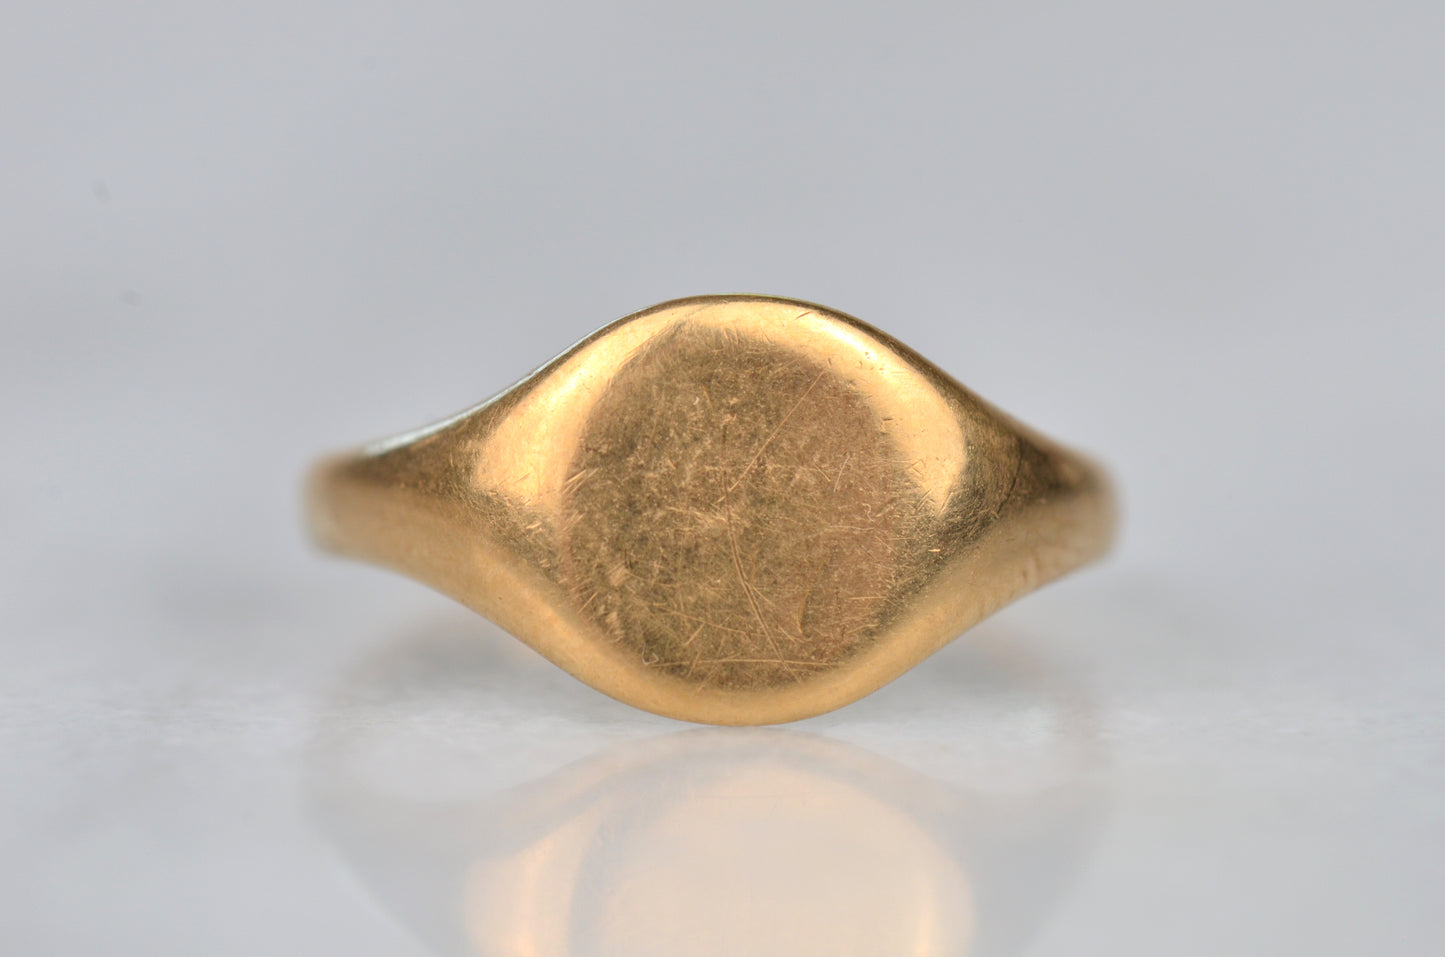 Glowing Antique Smooth Signet